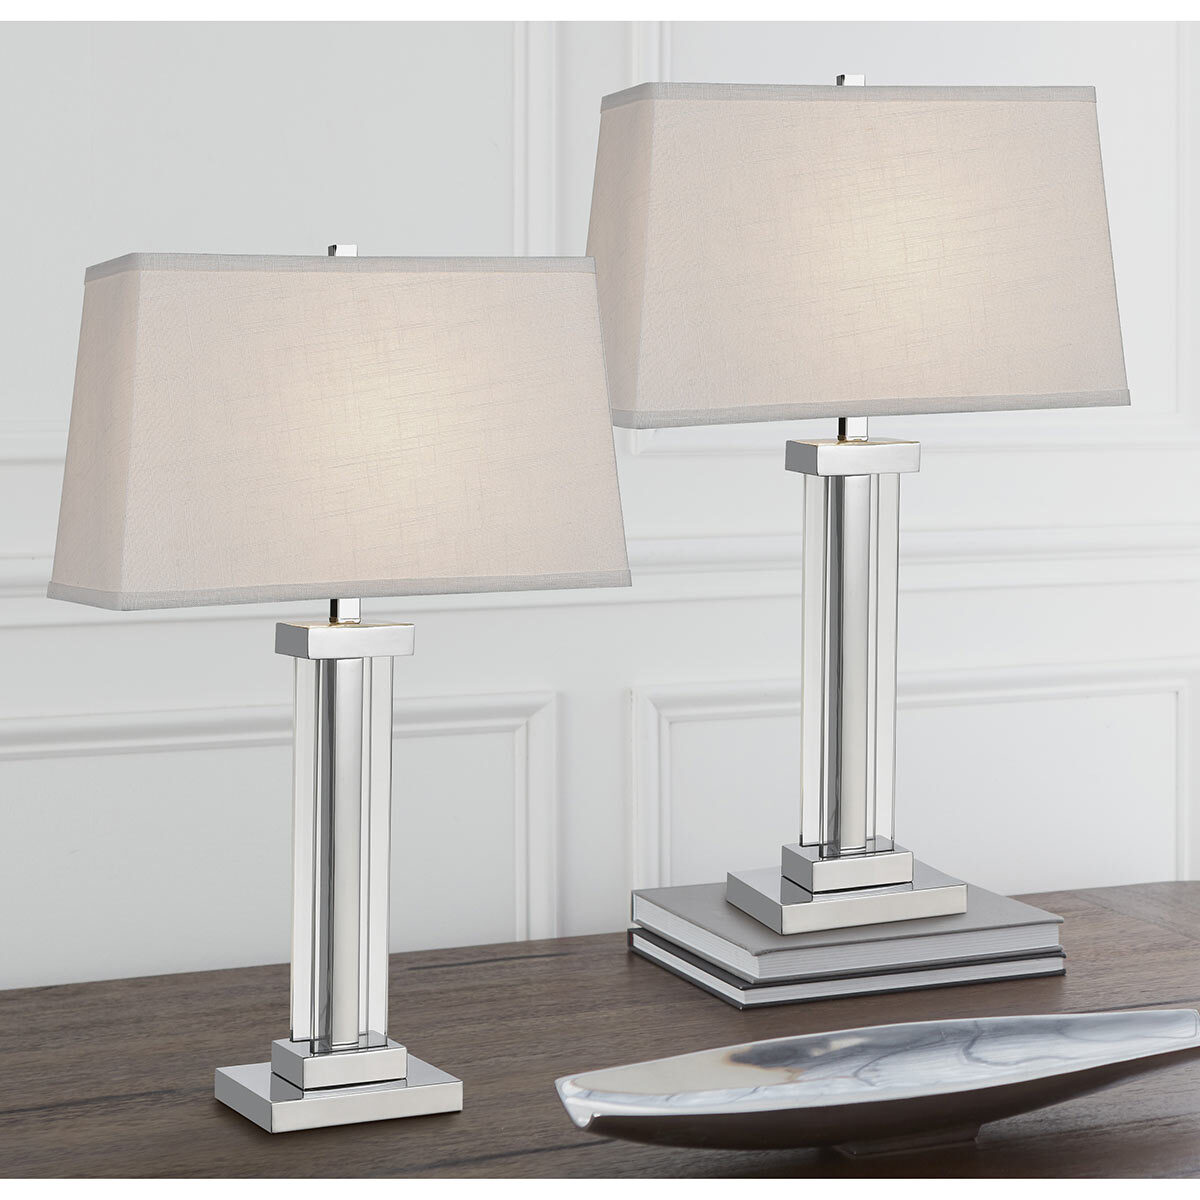 Kate Crystal Table Lamps 2 Pack, Matching Floor And Table Lamp Set Uk